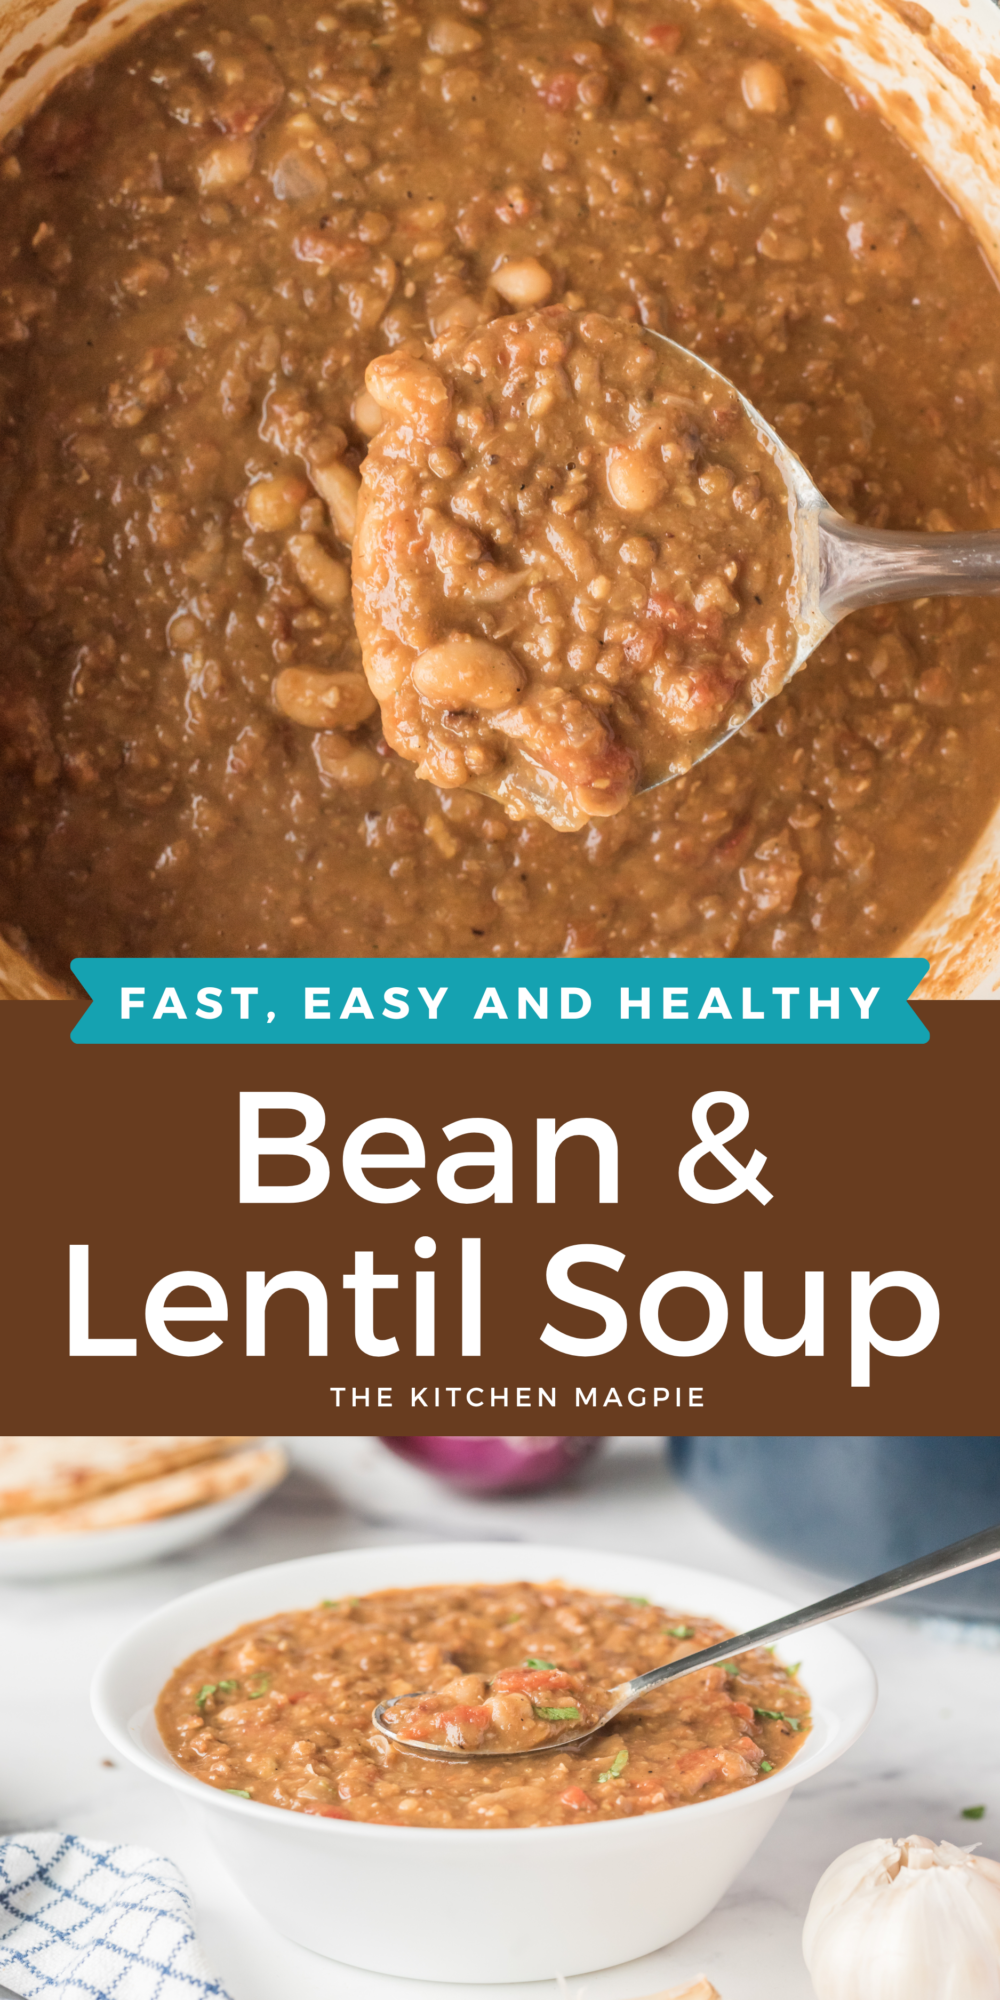 Spices, lentils, chickpeas, and beans all come together in an amazing soup that is tasty, vegetarian, and healthy.  